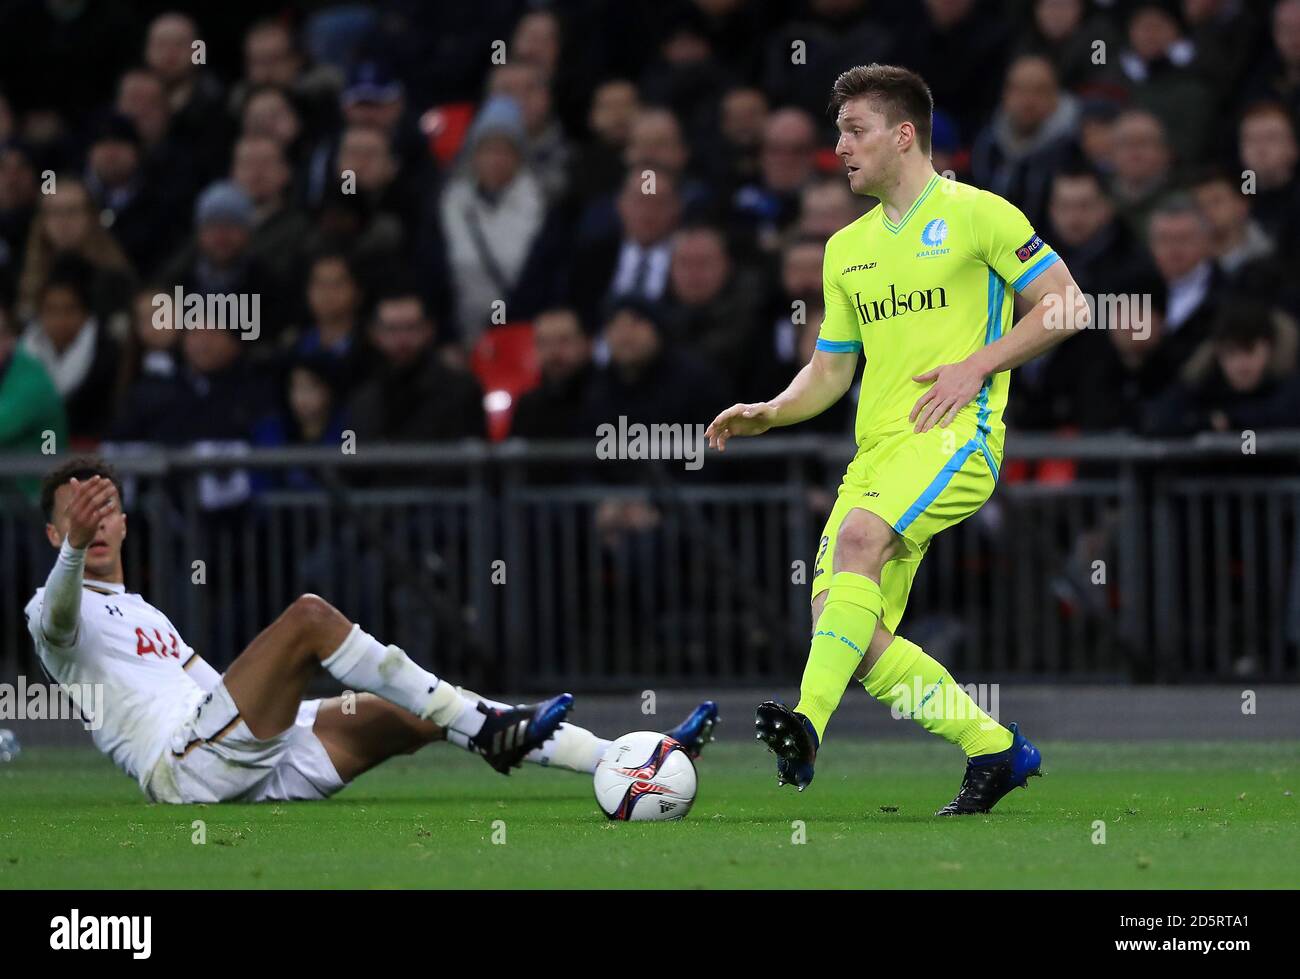 Tottenham Hotspur's Dele Alli (left) K.A.A. Gent's Dejaegere (right) during a tackle in a red card Stock - Alamy